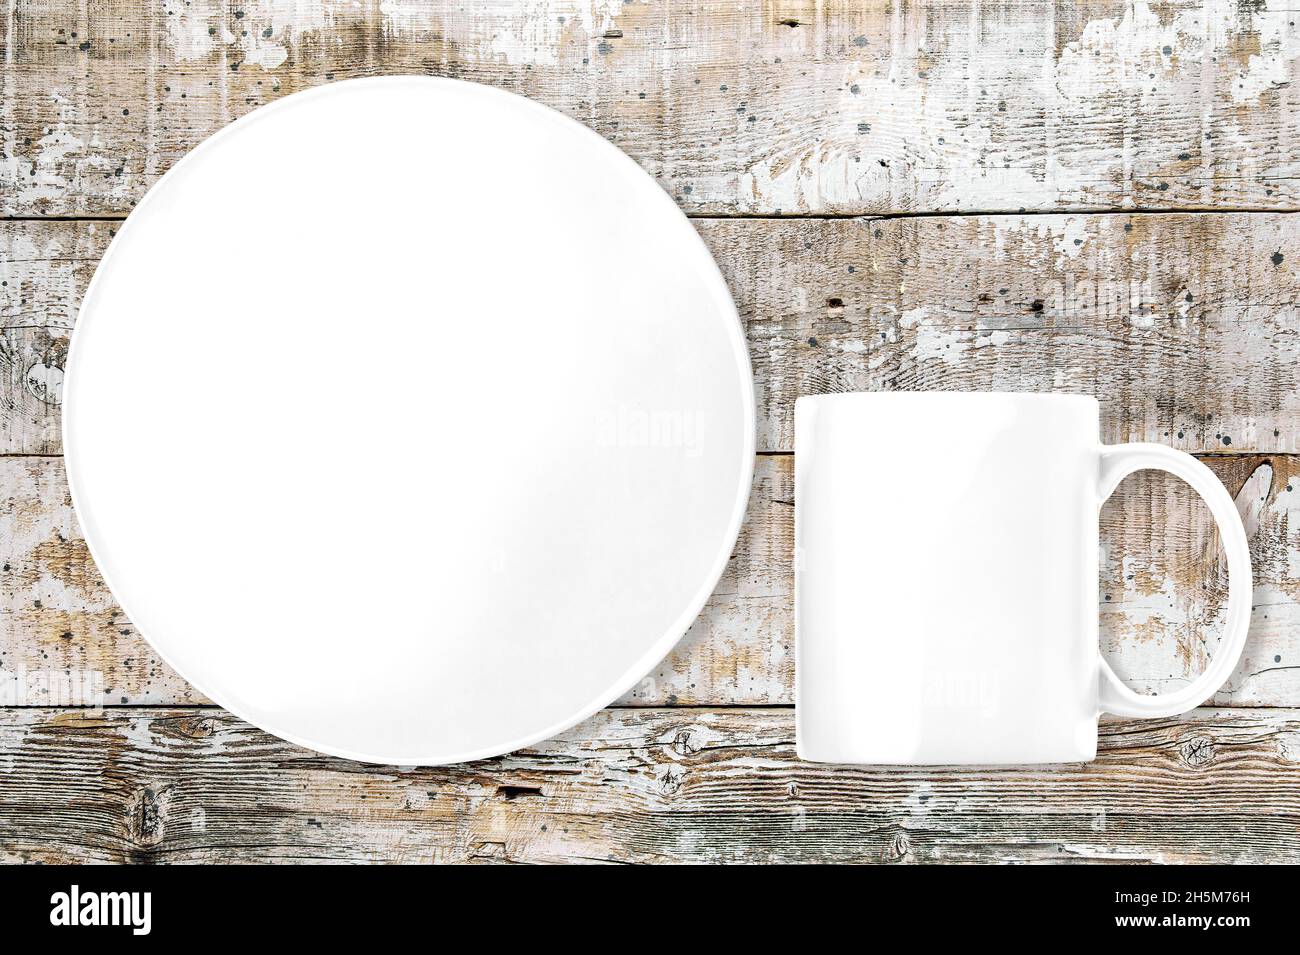 Mockup white plate tray and mug on rustic wooden background Stock Photo